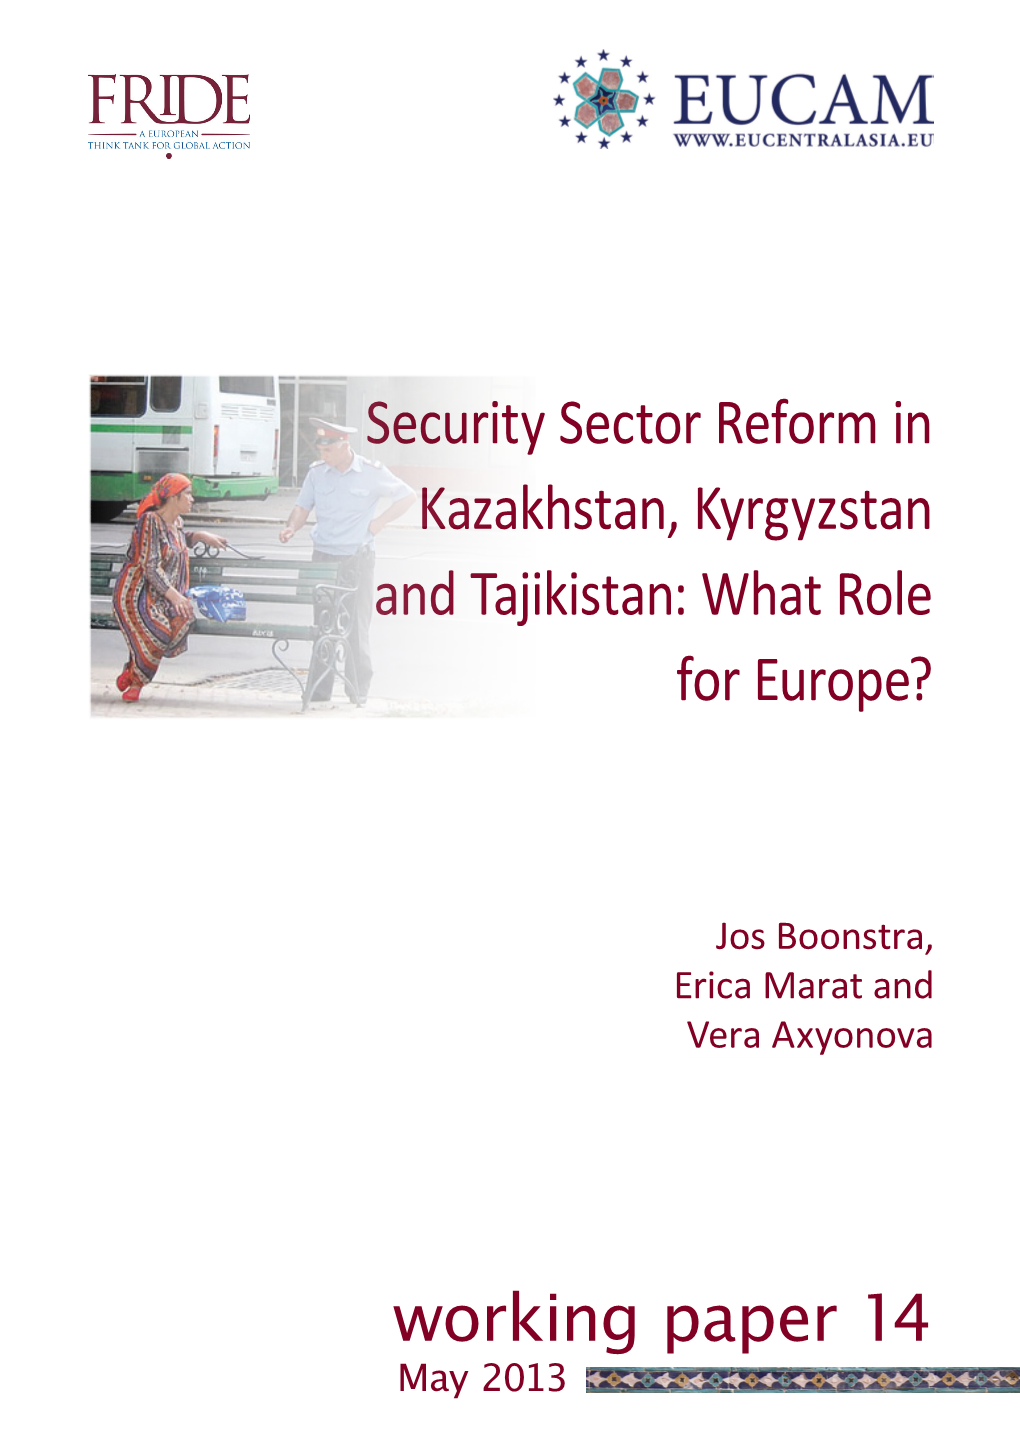 Security Sector Reform in Kazakhstan, Kyrgyzstan and Tajikistan: What Role for Europe?